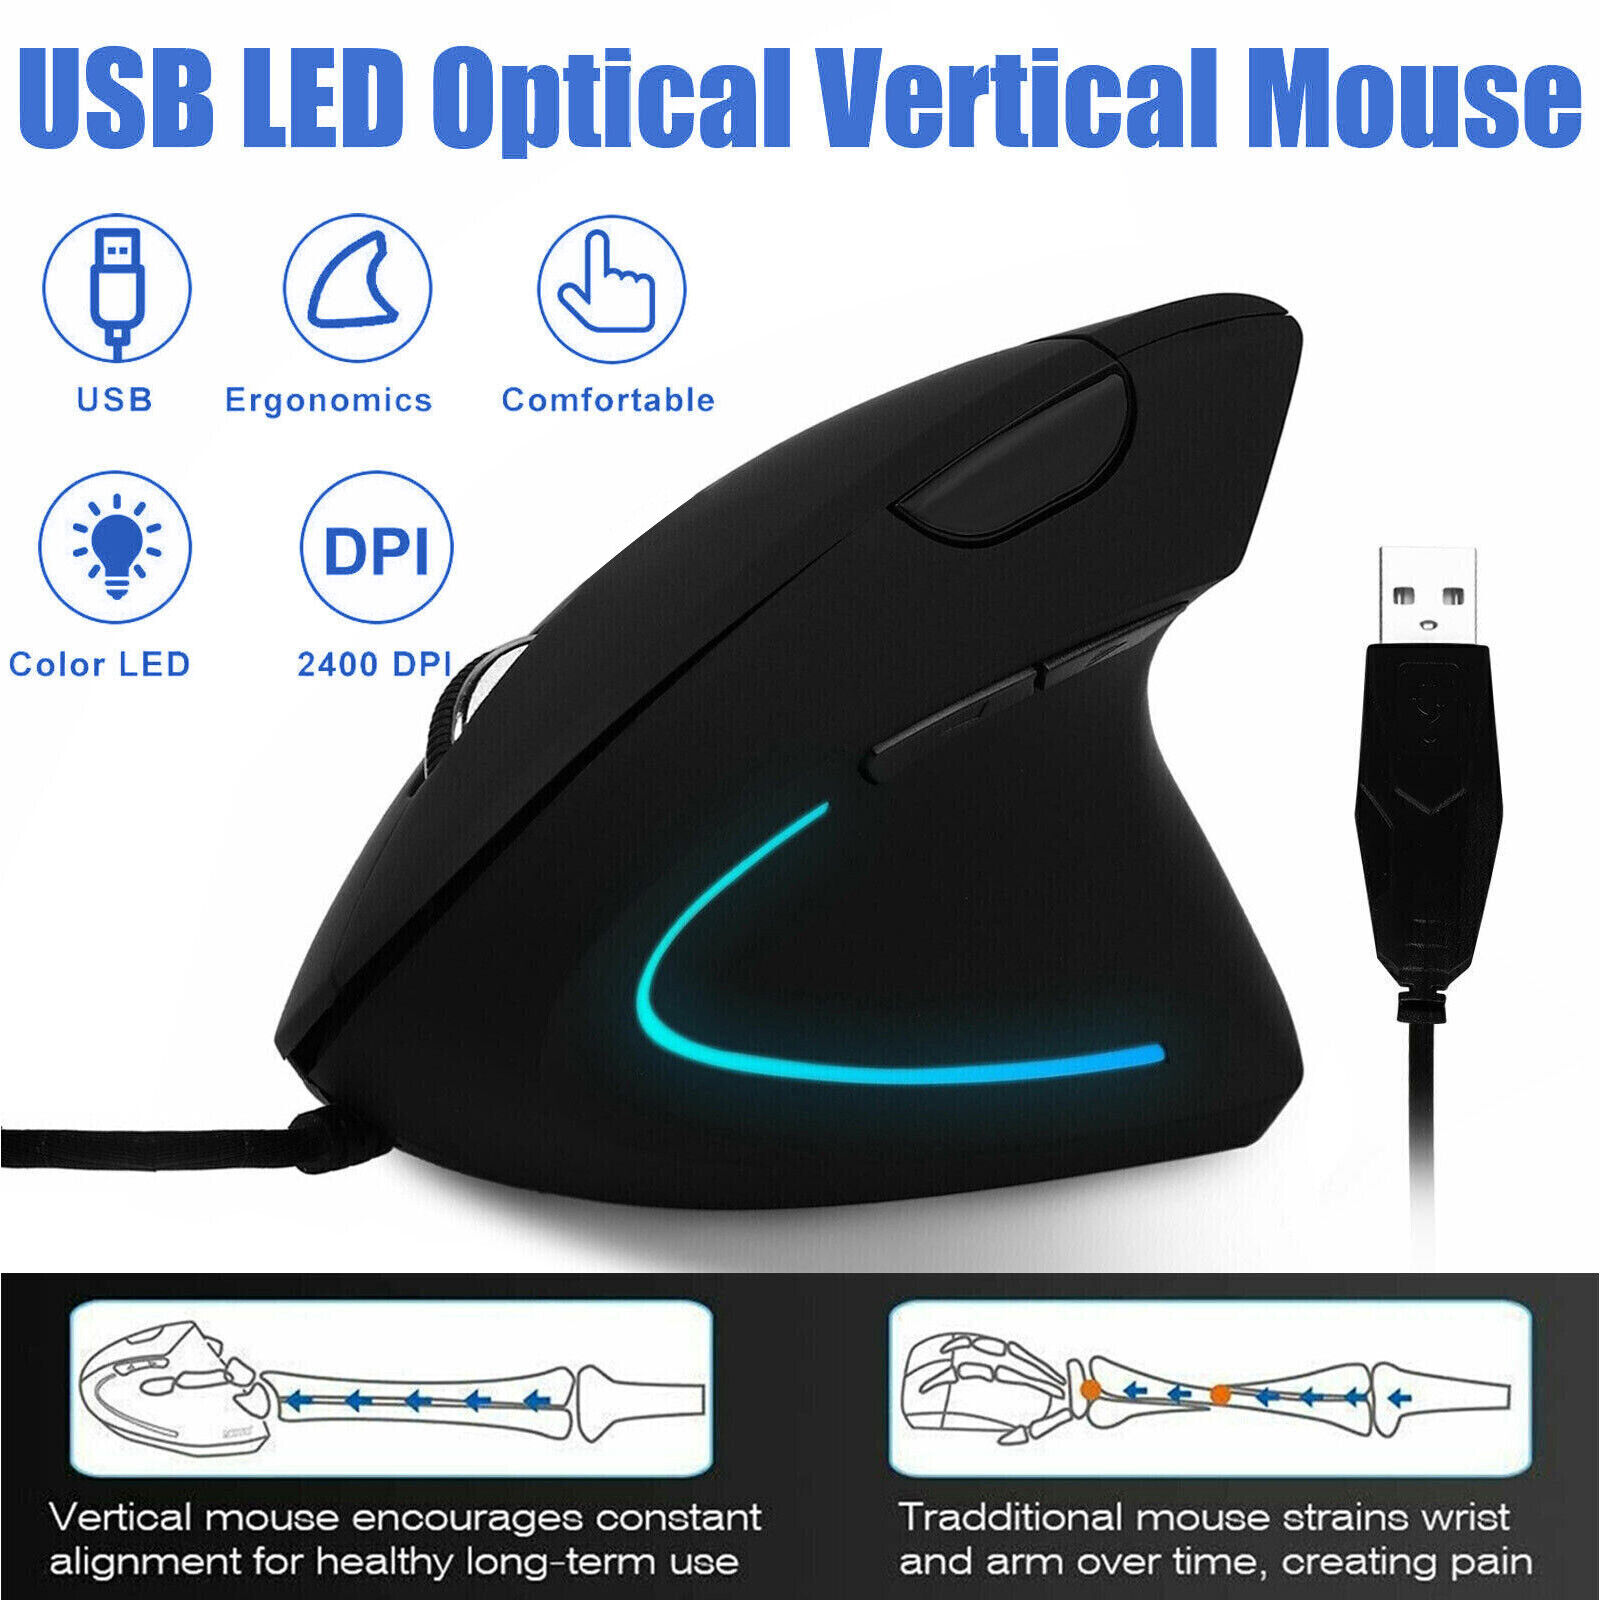 Ergonomic Optical Vertical Mouse Mice USB Wired LED Mice 2400 DPI For Laptop PC